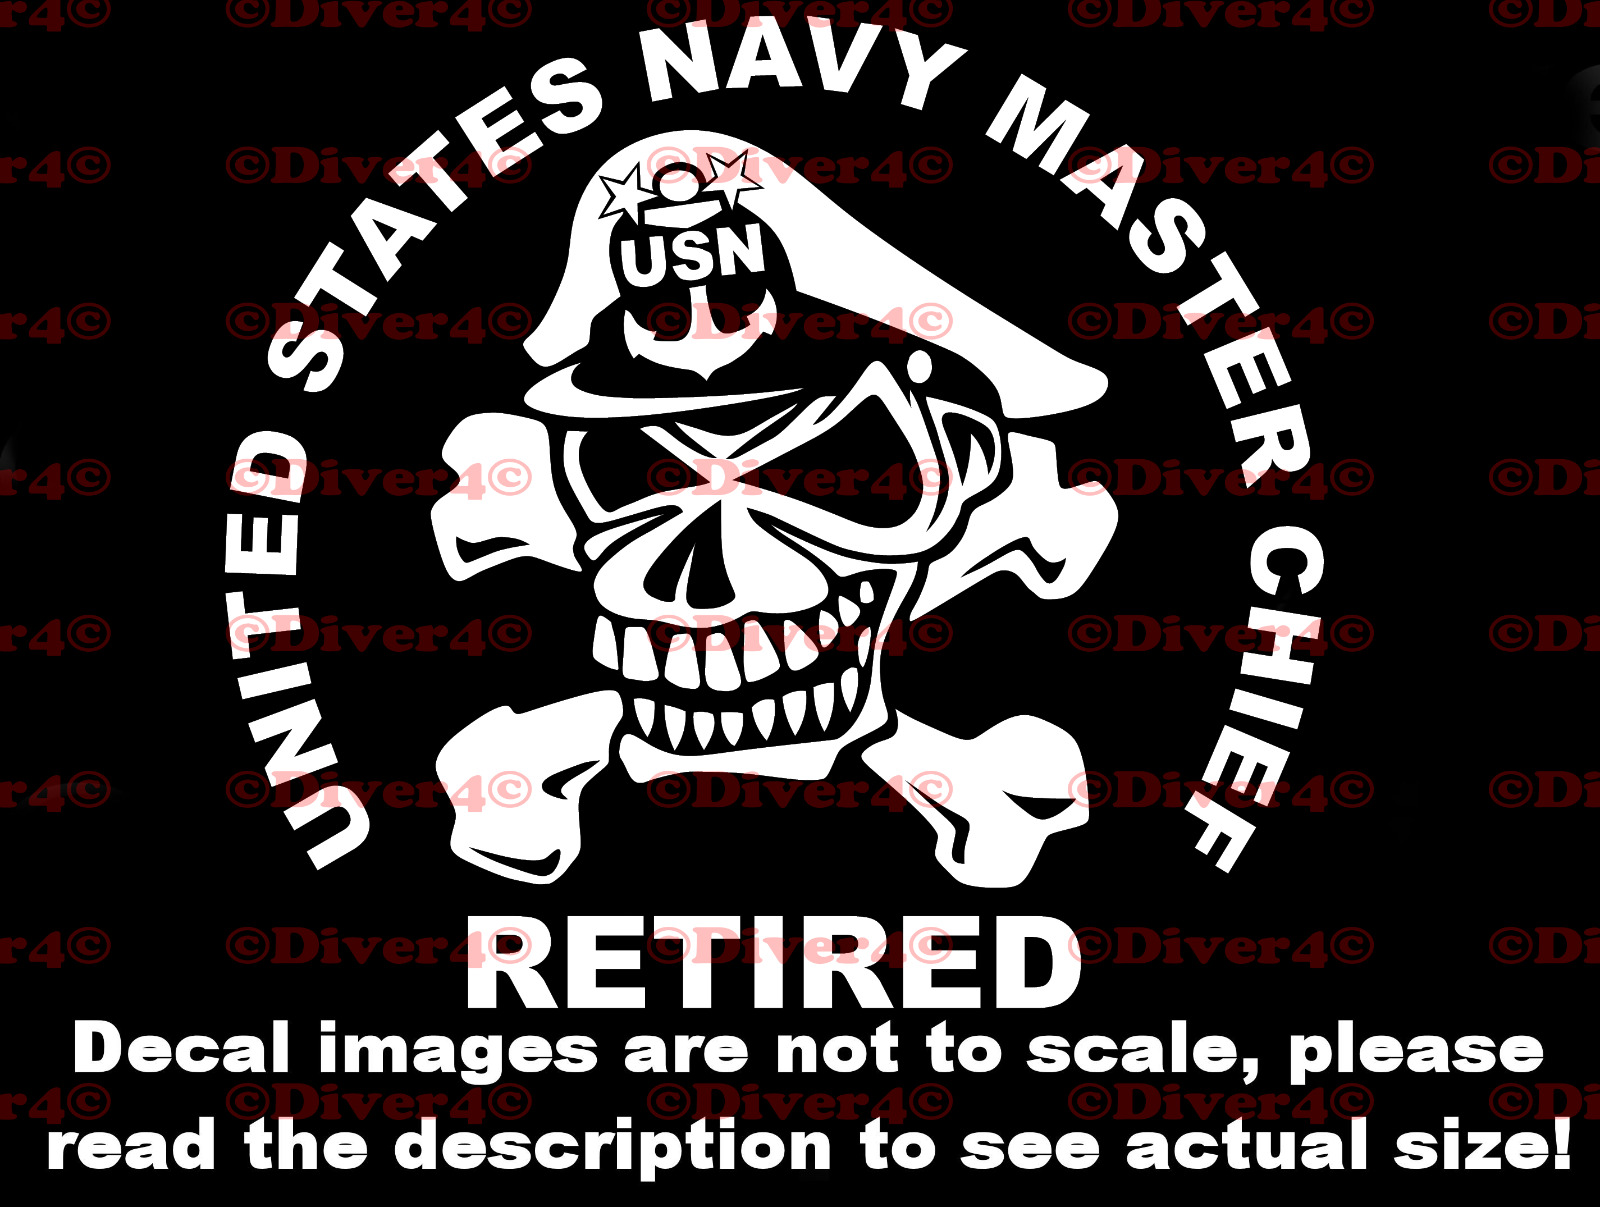 US Navy Master Chief Retired Decal Cut Vinyl Sticker Made in the USA USN